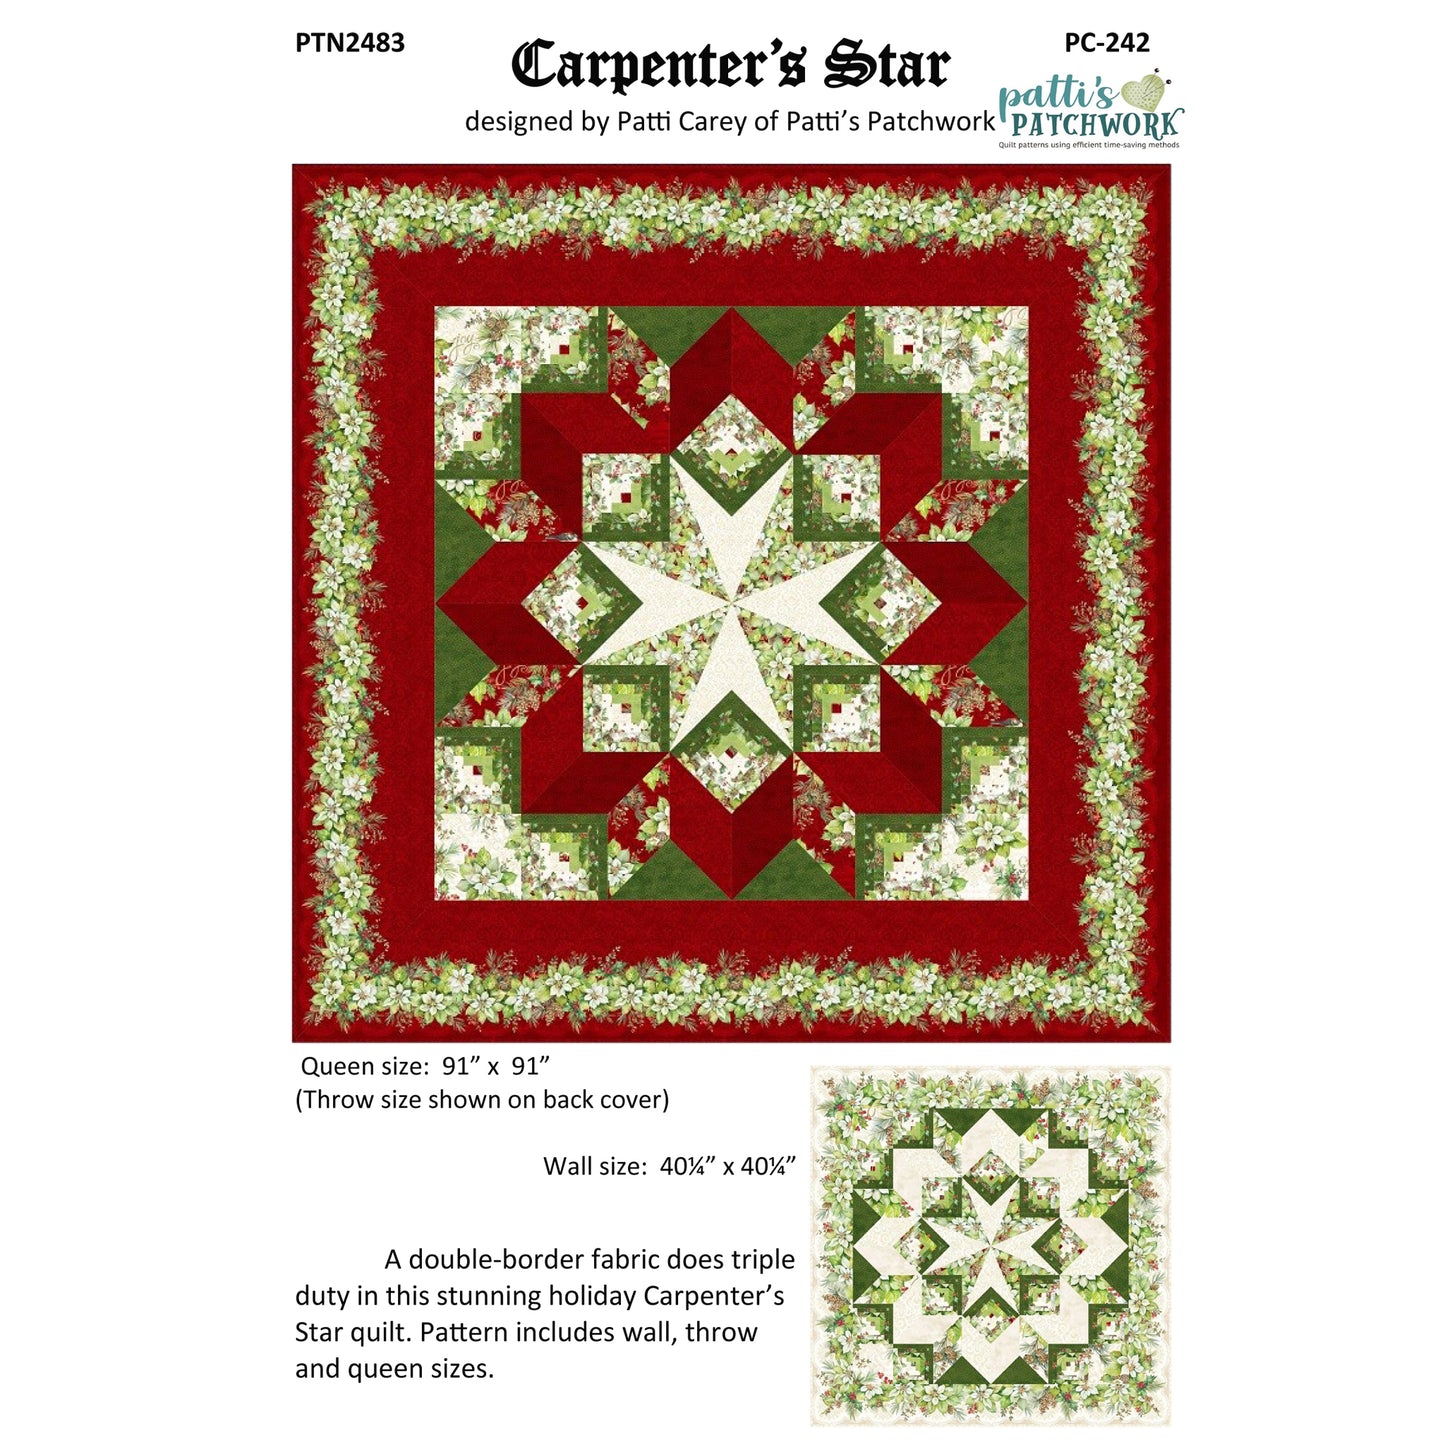 Cover image of Carpenter's Star Quilt and Wall Hanging.